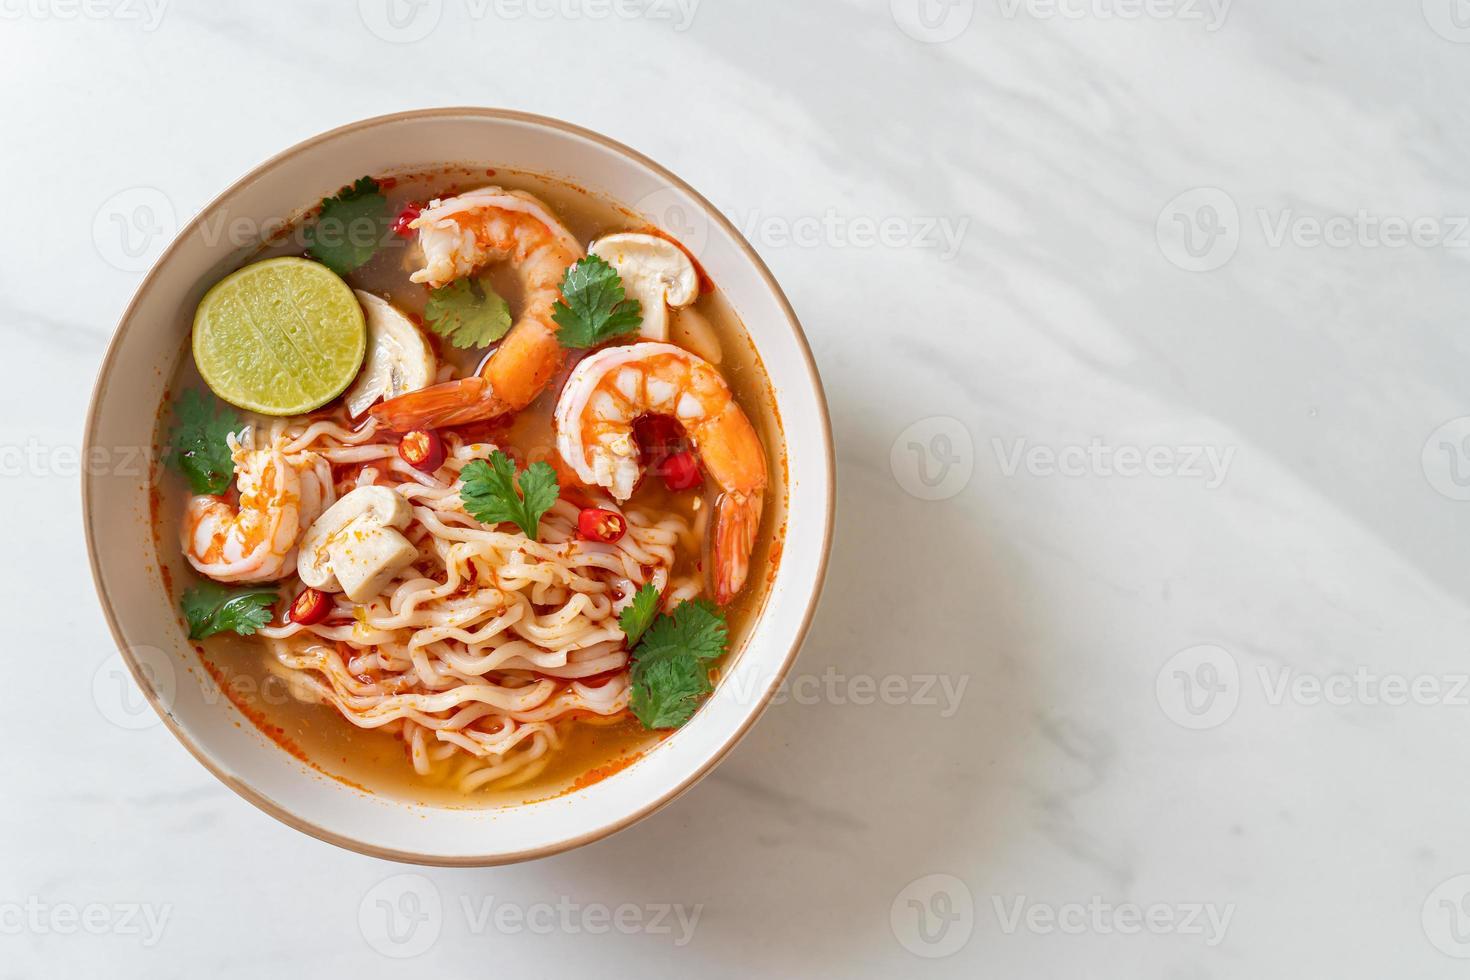 Instant noodles ramen in spicy soup with shrimps, or Tom Yum Kung - Asian food style photo